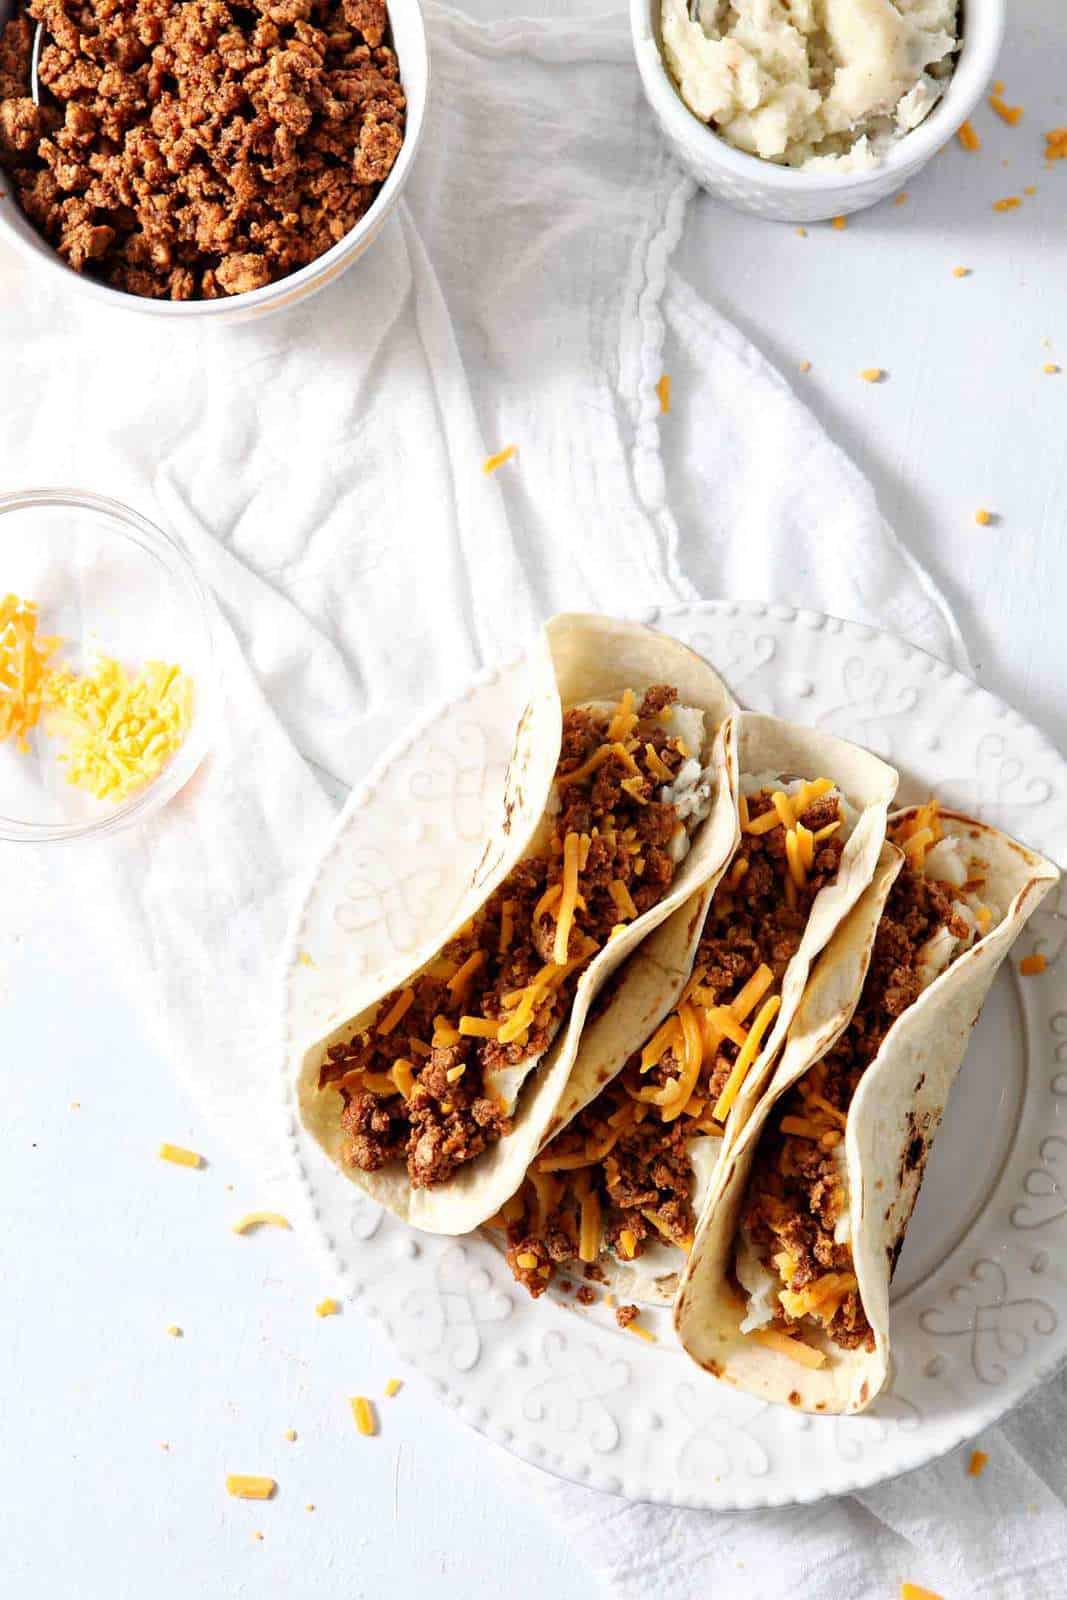 In search of the ultimate comforting breakfast? Look no farther than Mashed Potato Chorizo Breakfast Tacos! These tacos, made with store-bought chorizo and homemade mashed potatoes, are the stuff dreams are made of. They cook up quickly to create a flavorful meal! Easy to make ahead of time and freeze, these breakfast tacos are an ideal dish to bring a new mama, friends who moved, etc. Mashed Potato Chorizo Breakfast Tacos are an amazing meal!